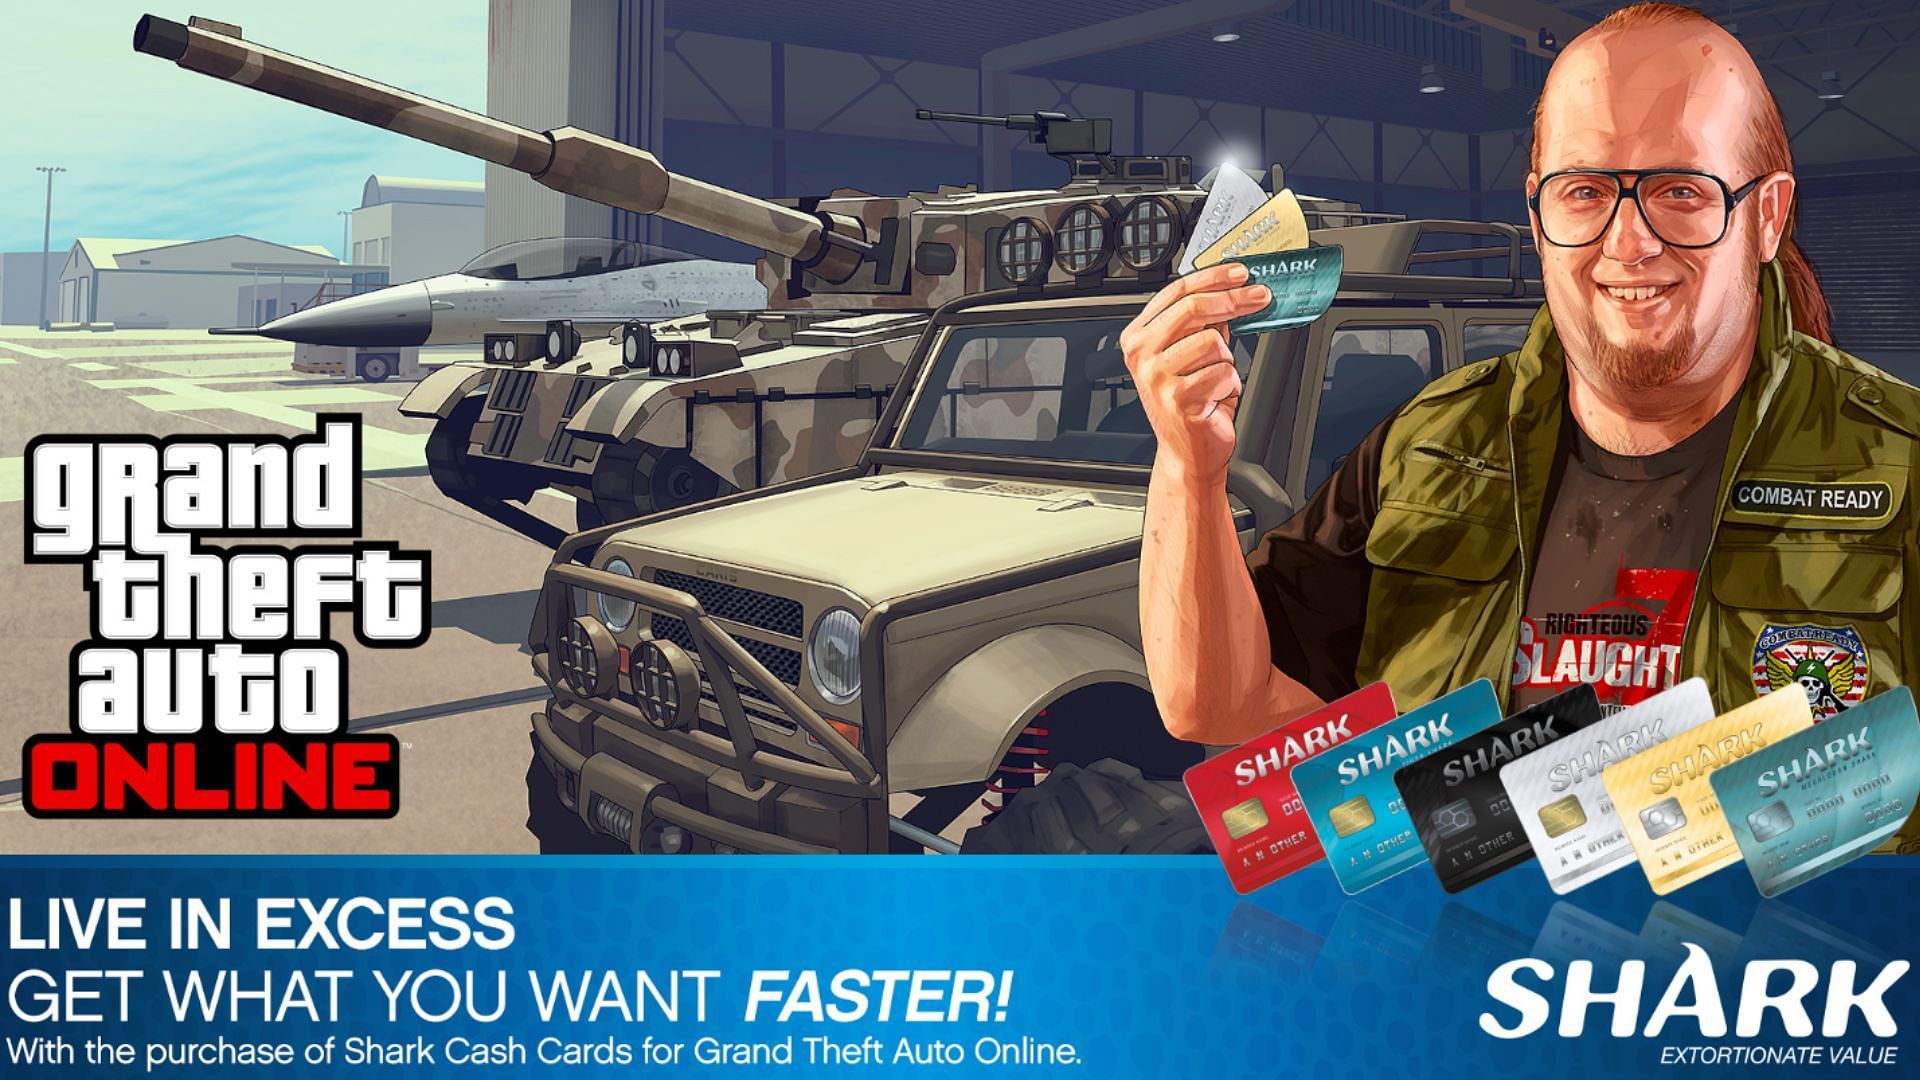 A promotional image for Shark Cards in Grand Theft Auto Online (Image via Rockstar Games)